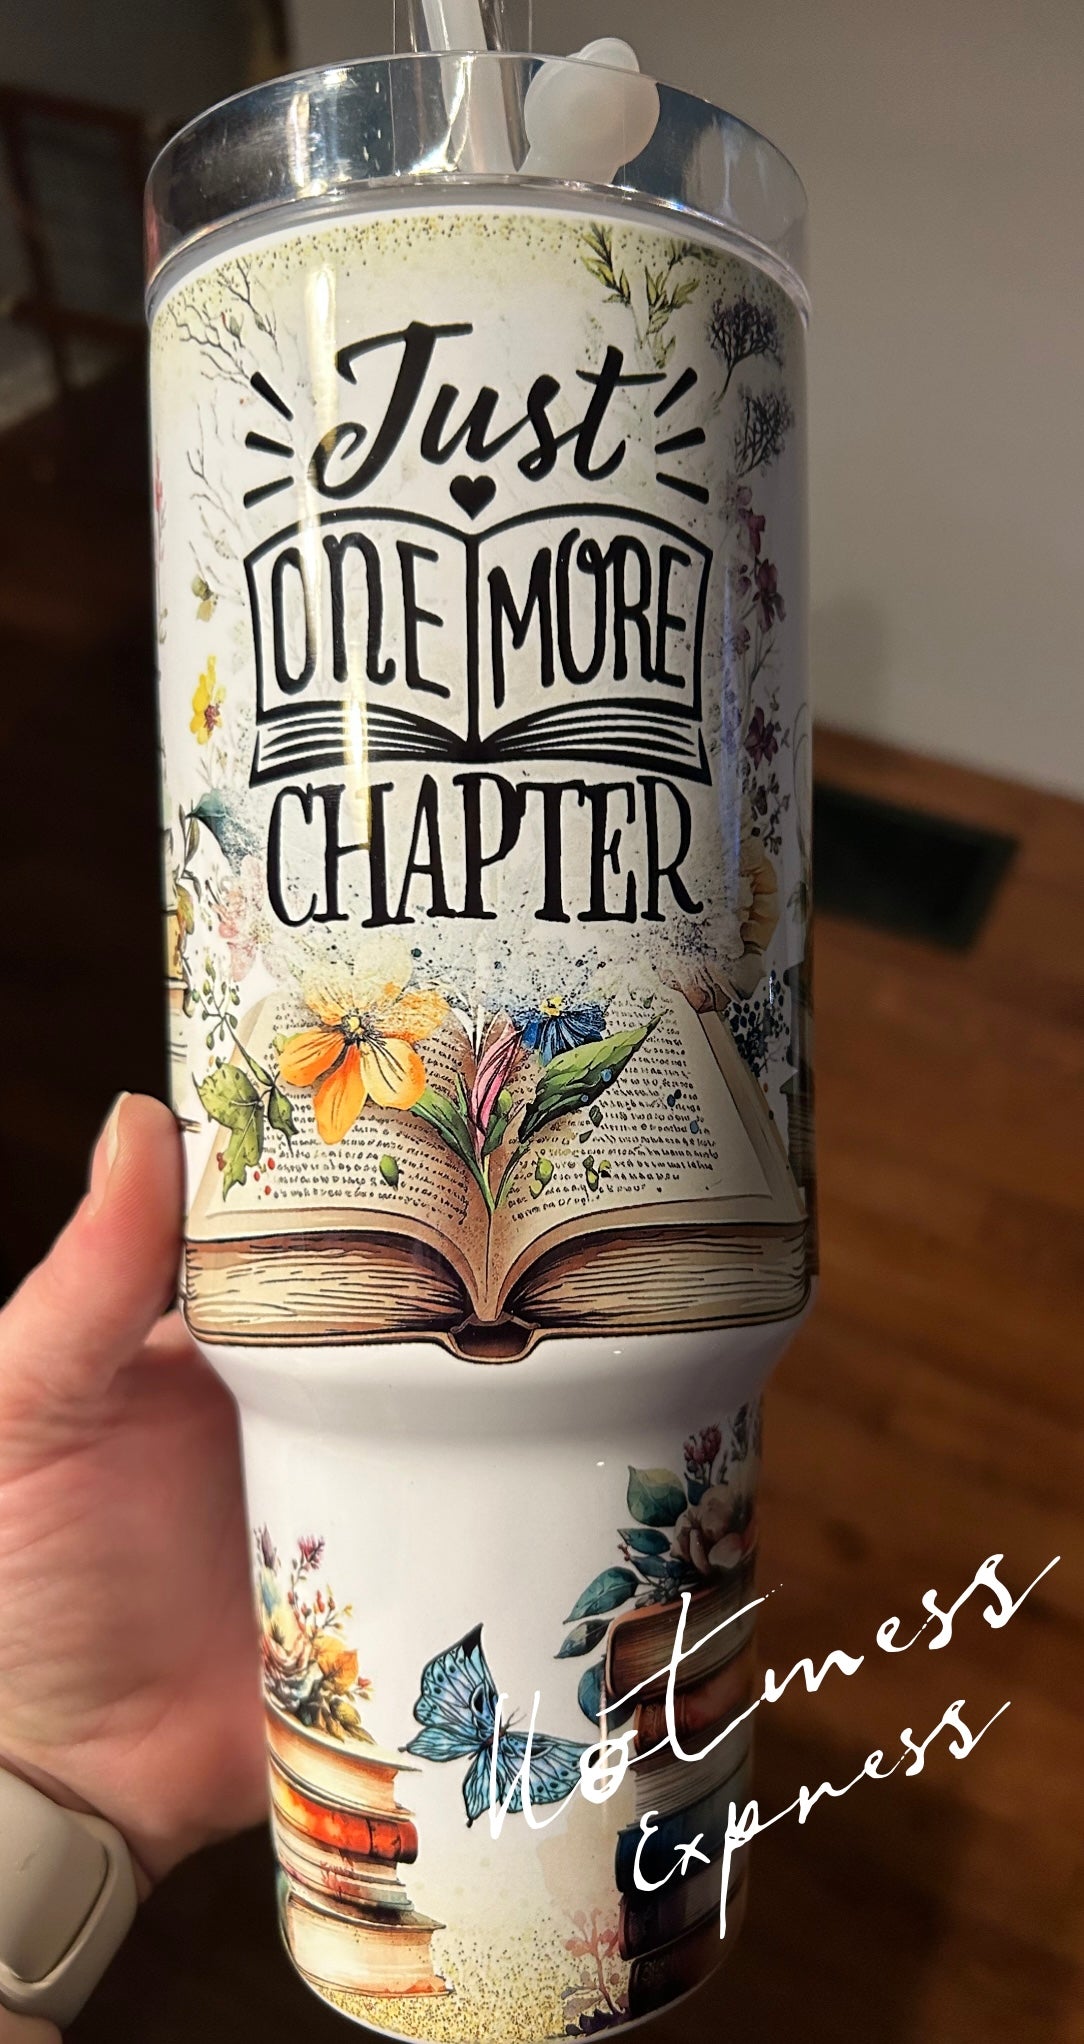 Just One More Chapter 40oz Handle tumblers - made to order